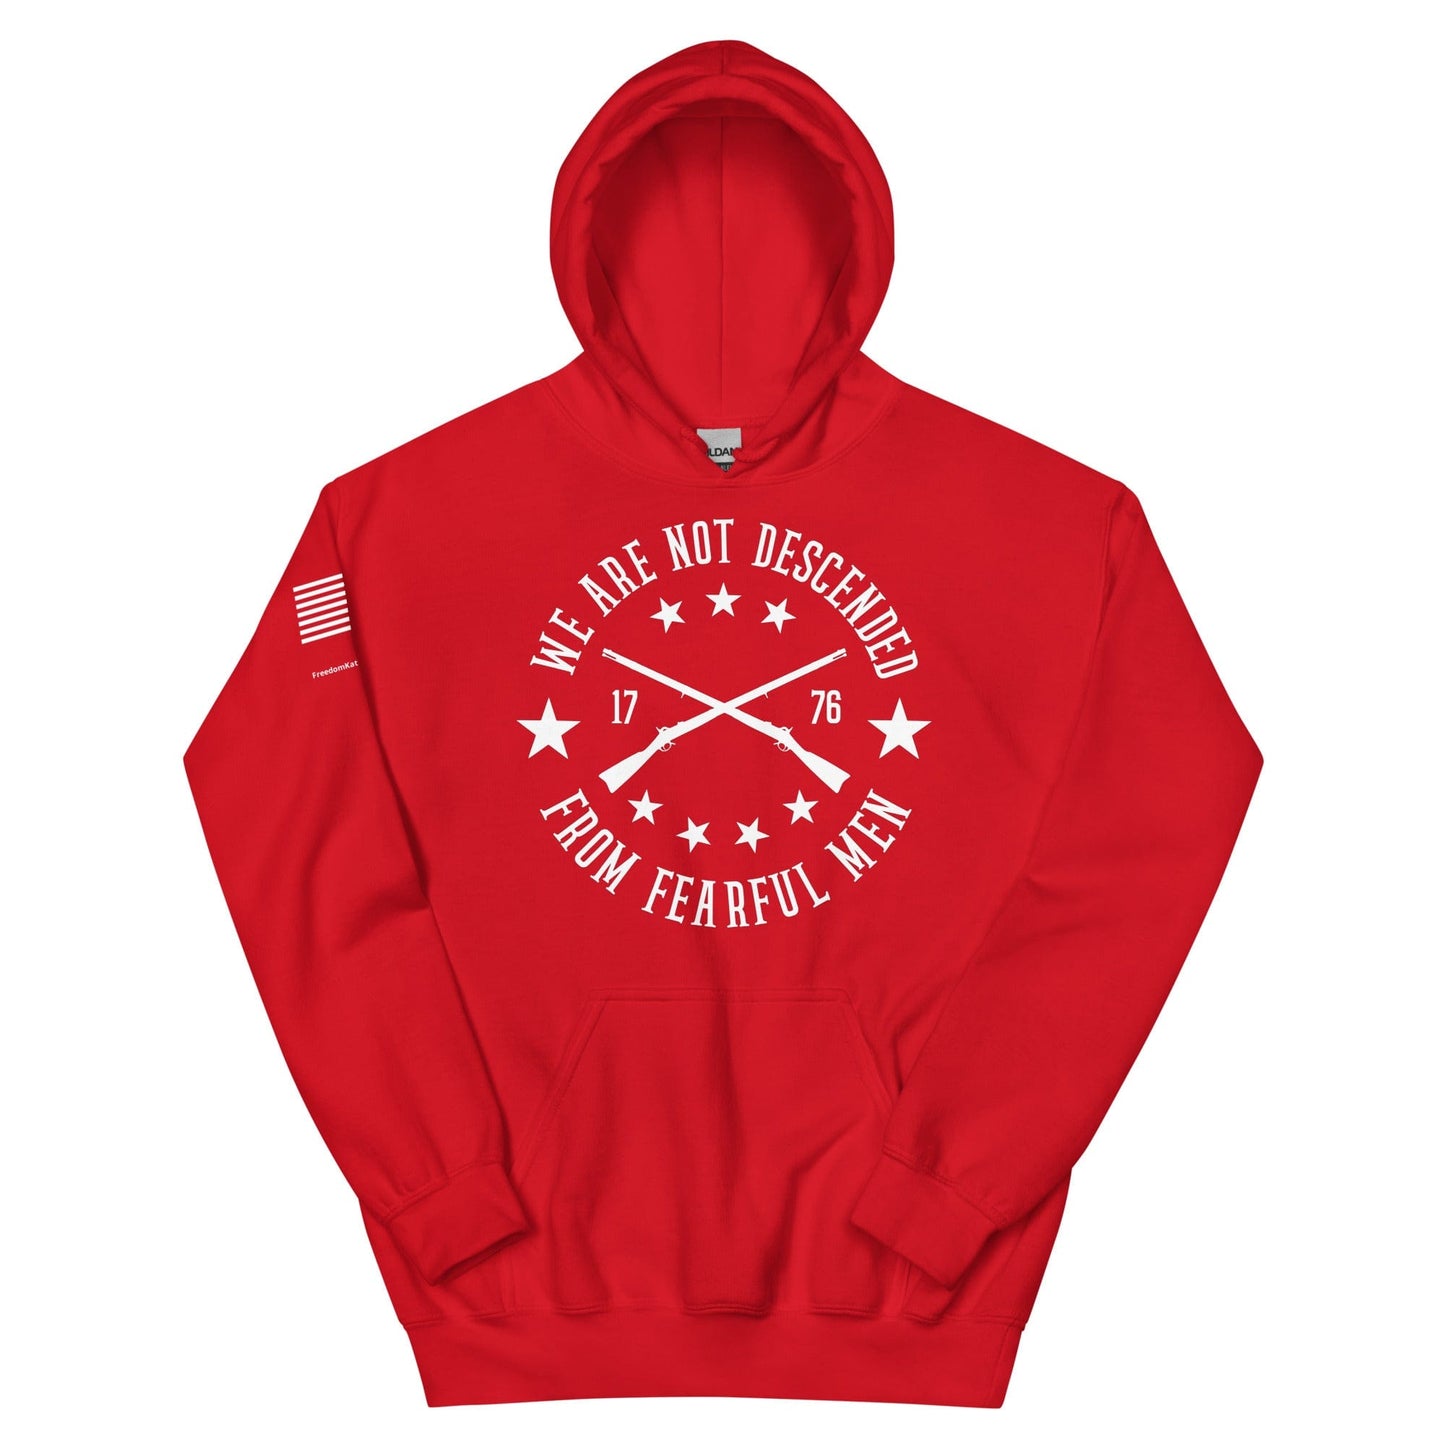 FreedomKat Designs Hoodie Red / S We Are Not Descended From Fearful Men Hoodie